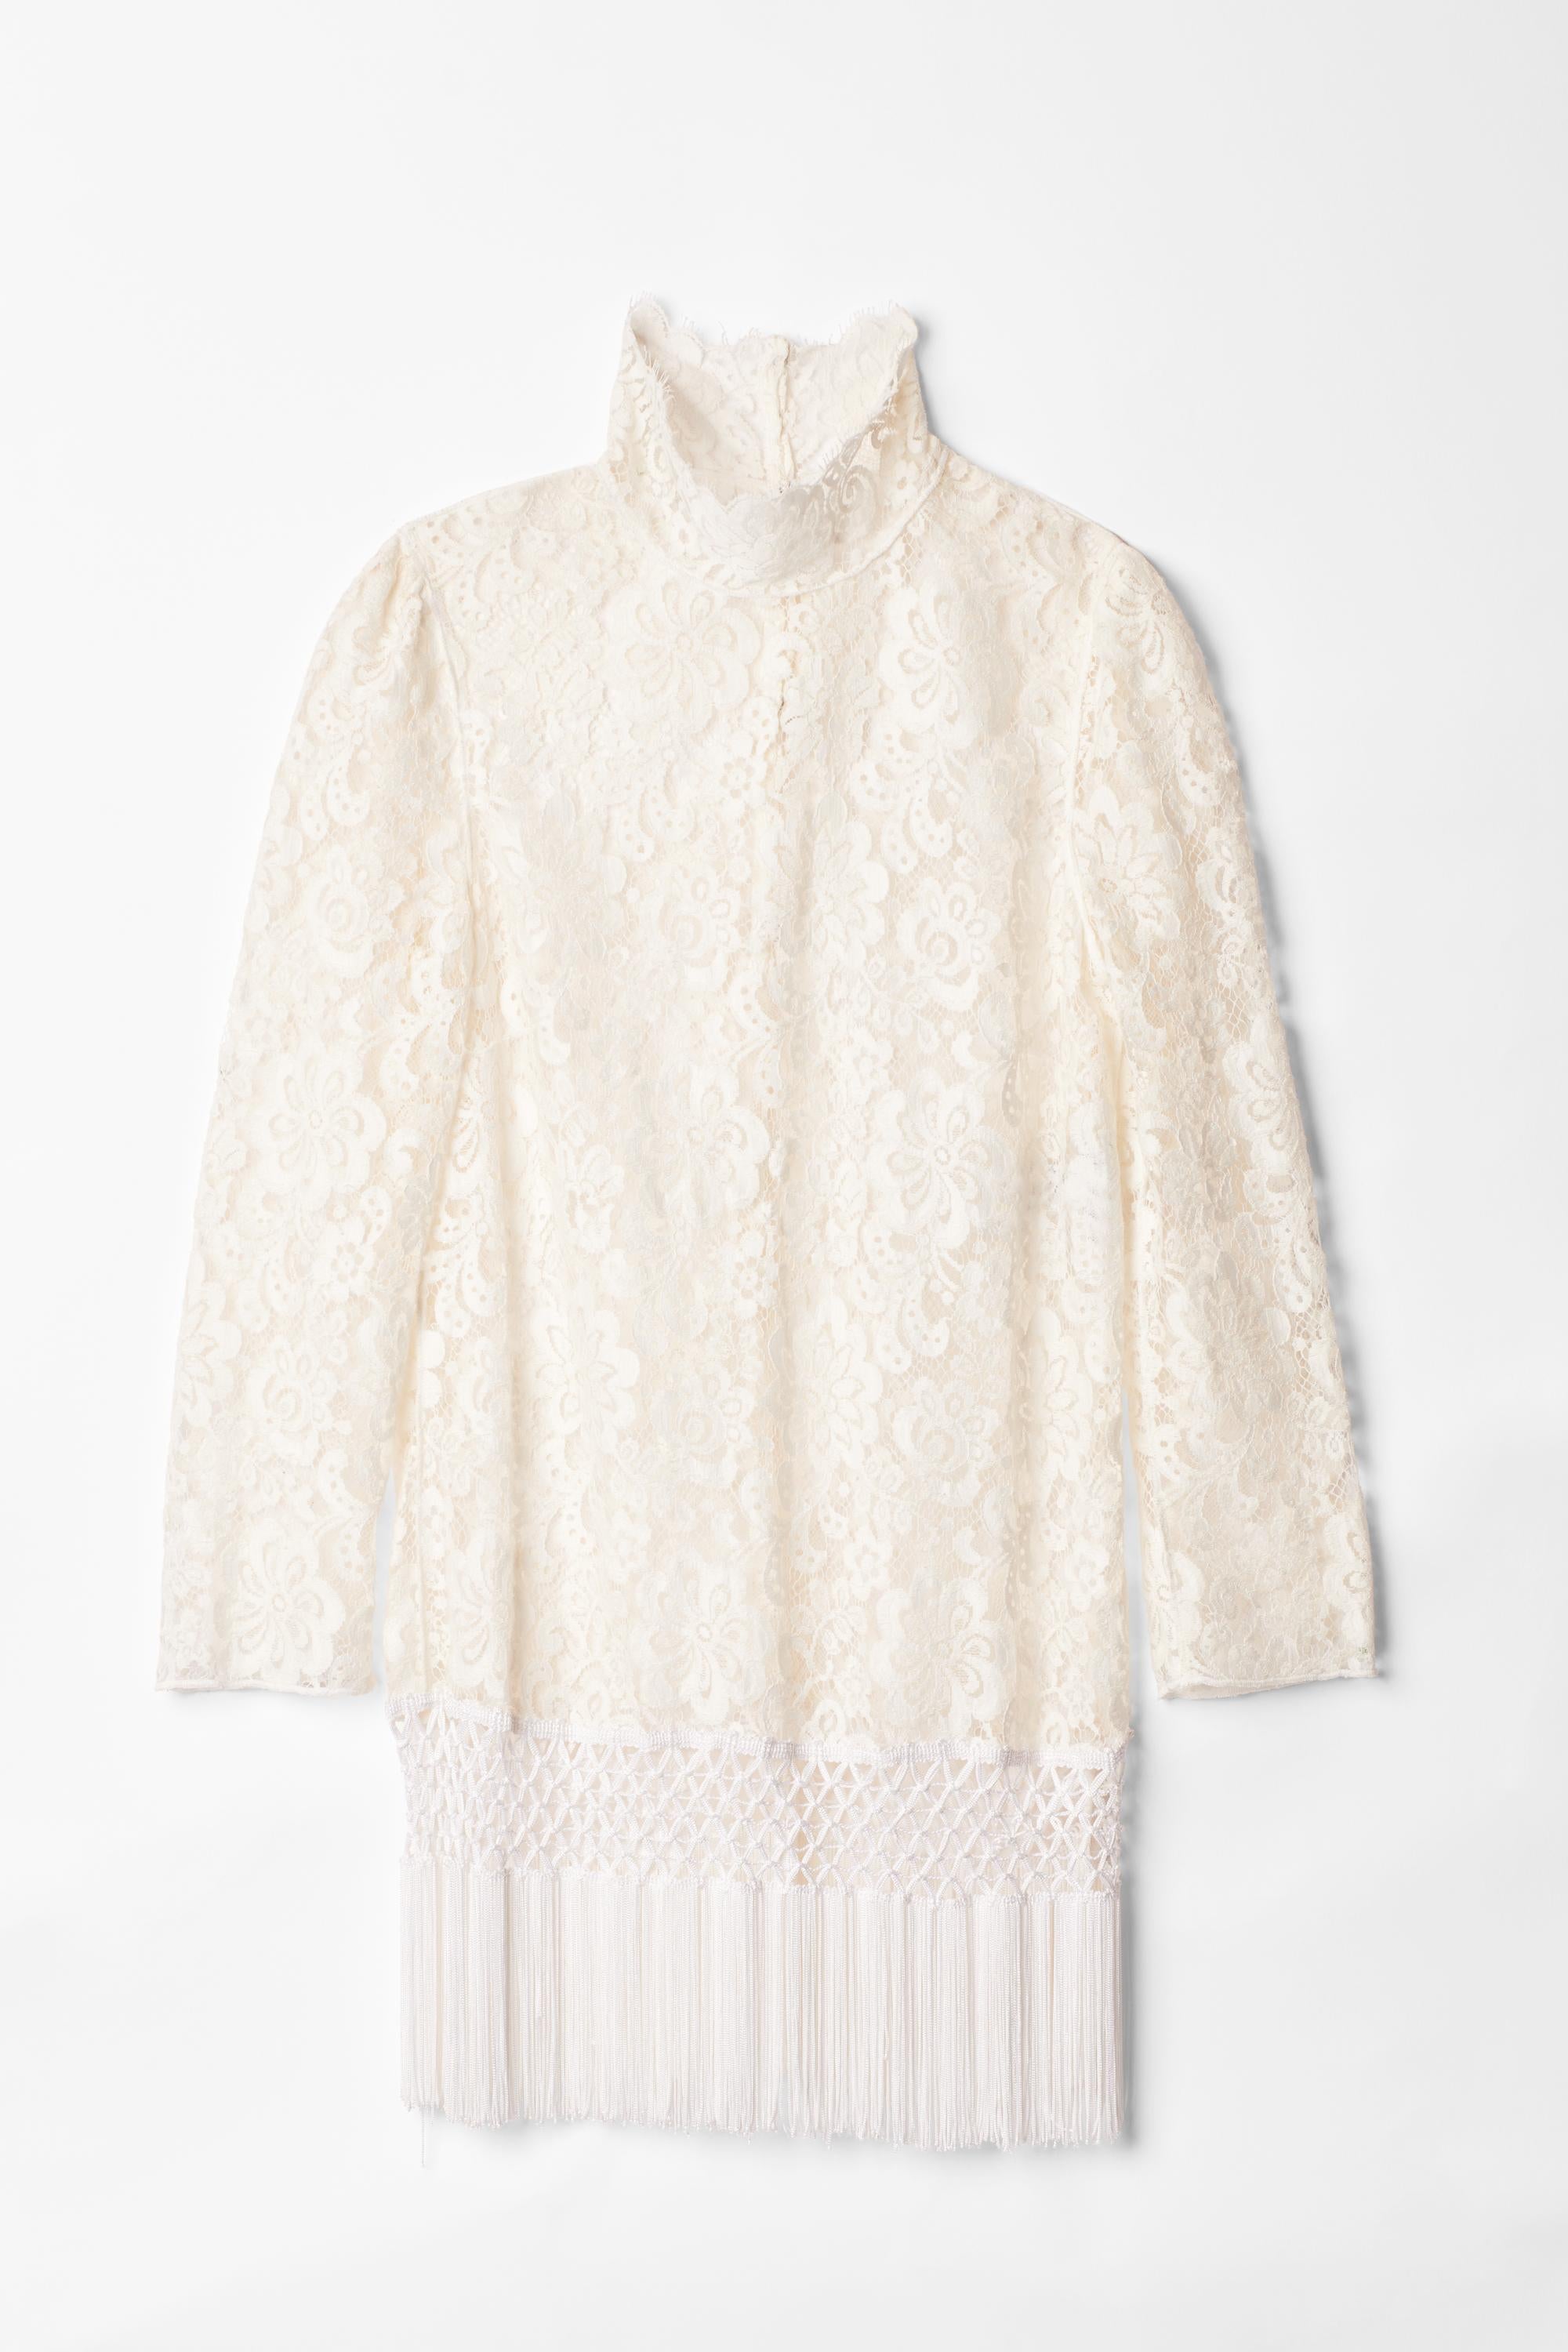 Women's S/S 2010 White Lace Dress Top For Sale